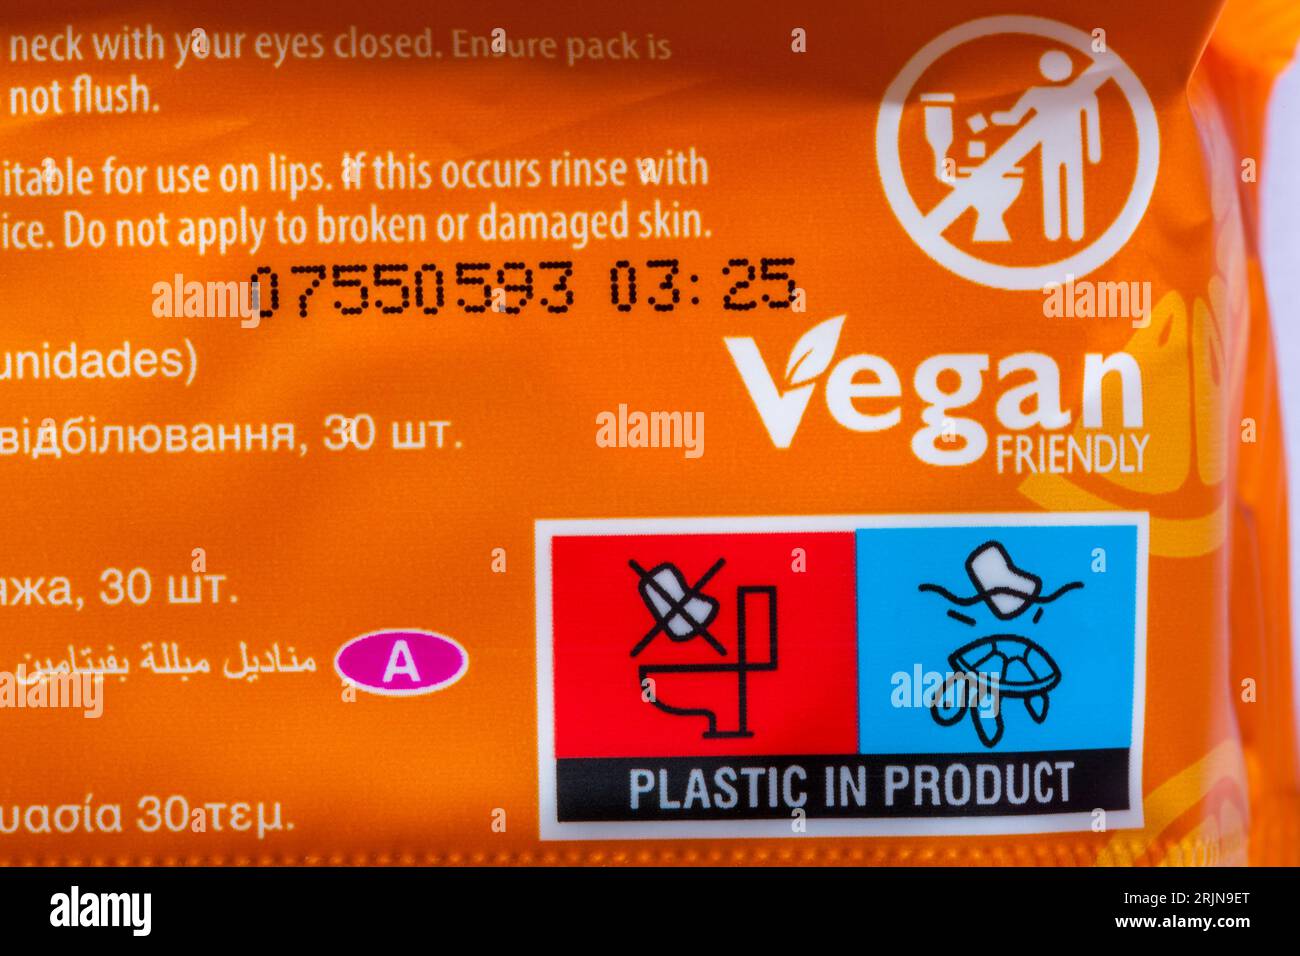 plastic in product symbols on vegan friendly pack of Beauty Formulas Brightening Vitamin C make-up remover wipes Stock Photo